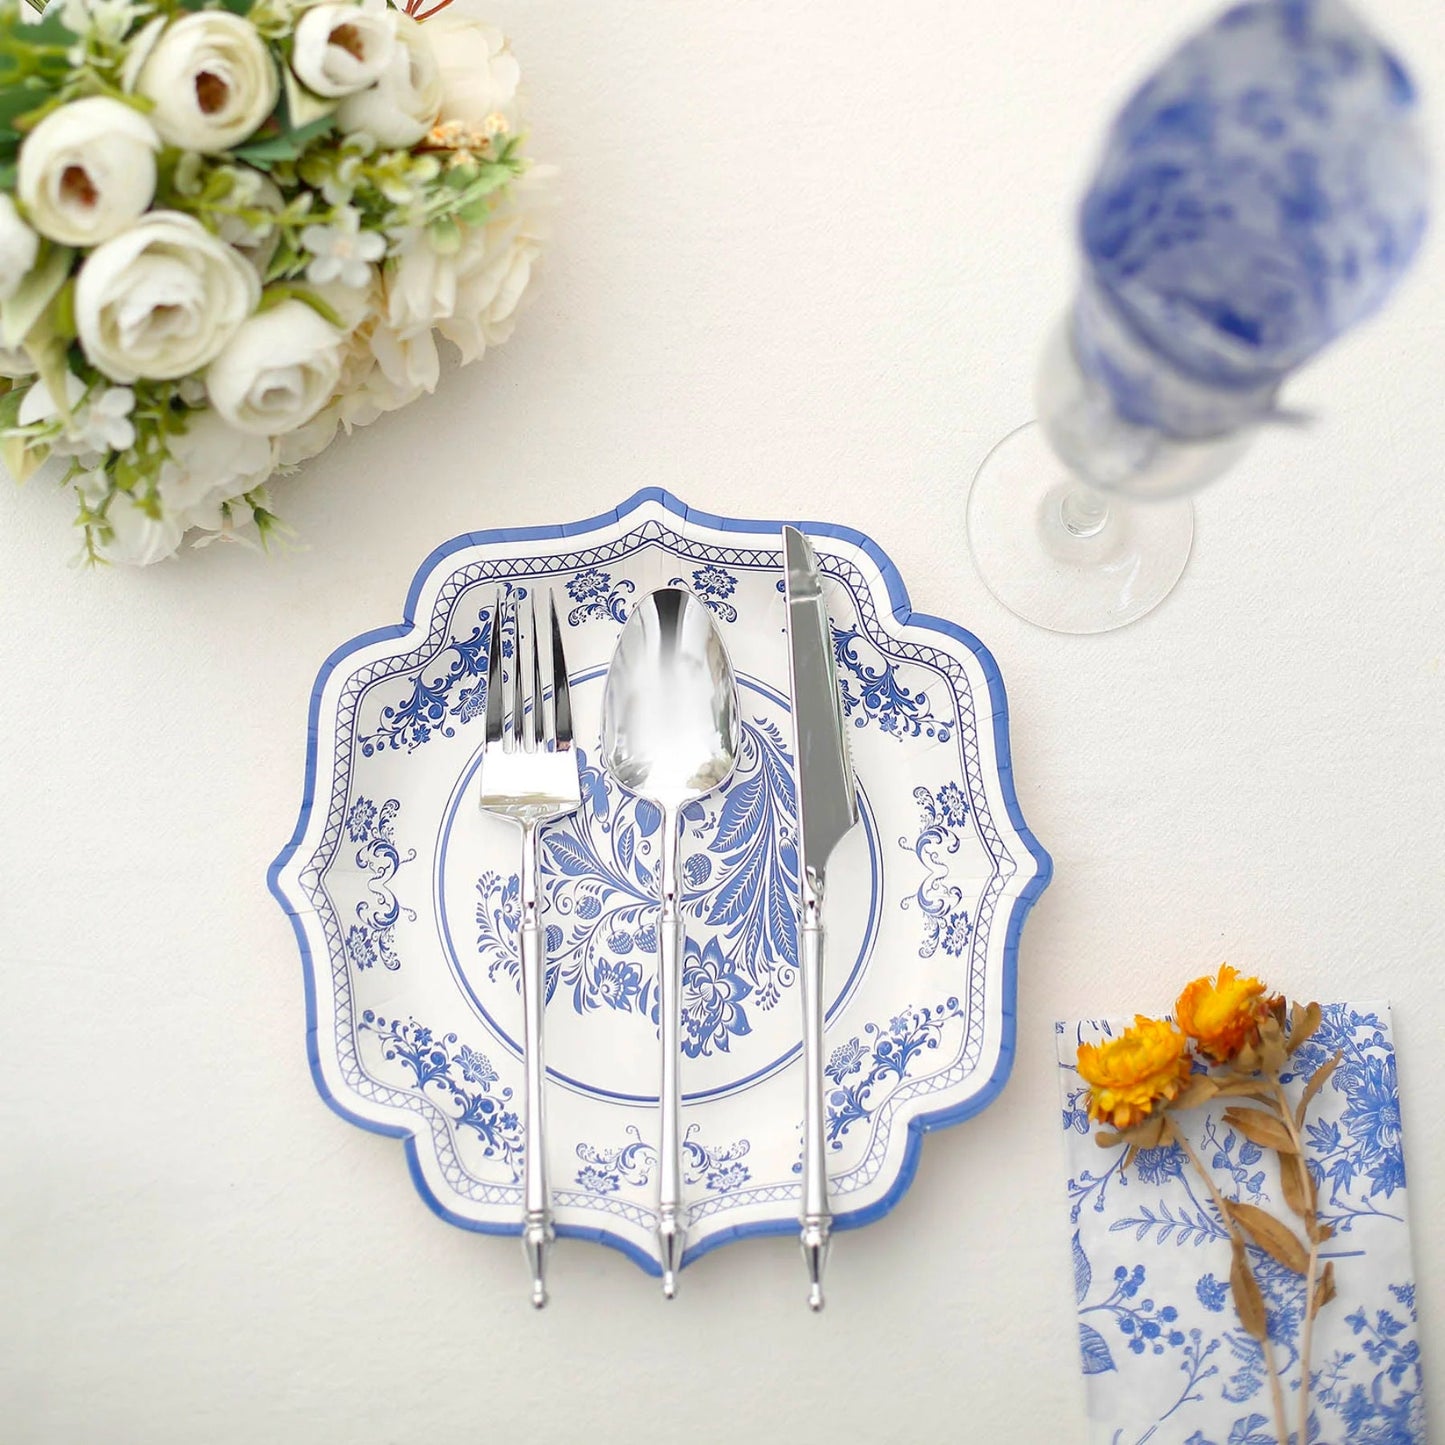 Paper Party Plates Floral Chinoiserie Print